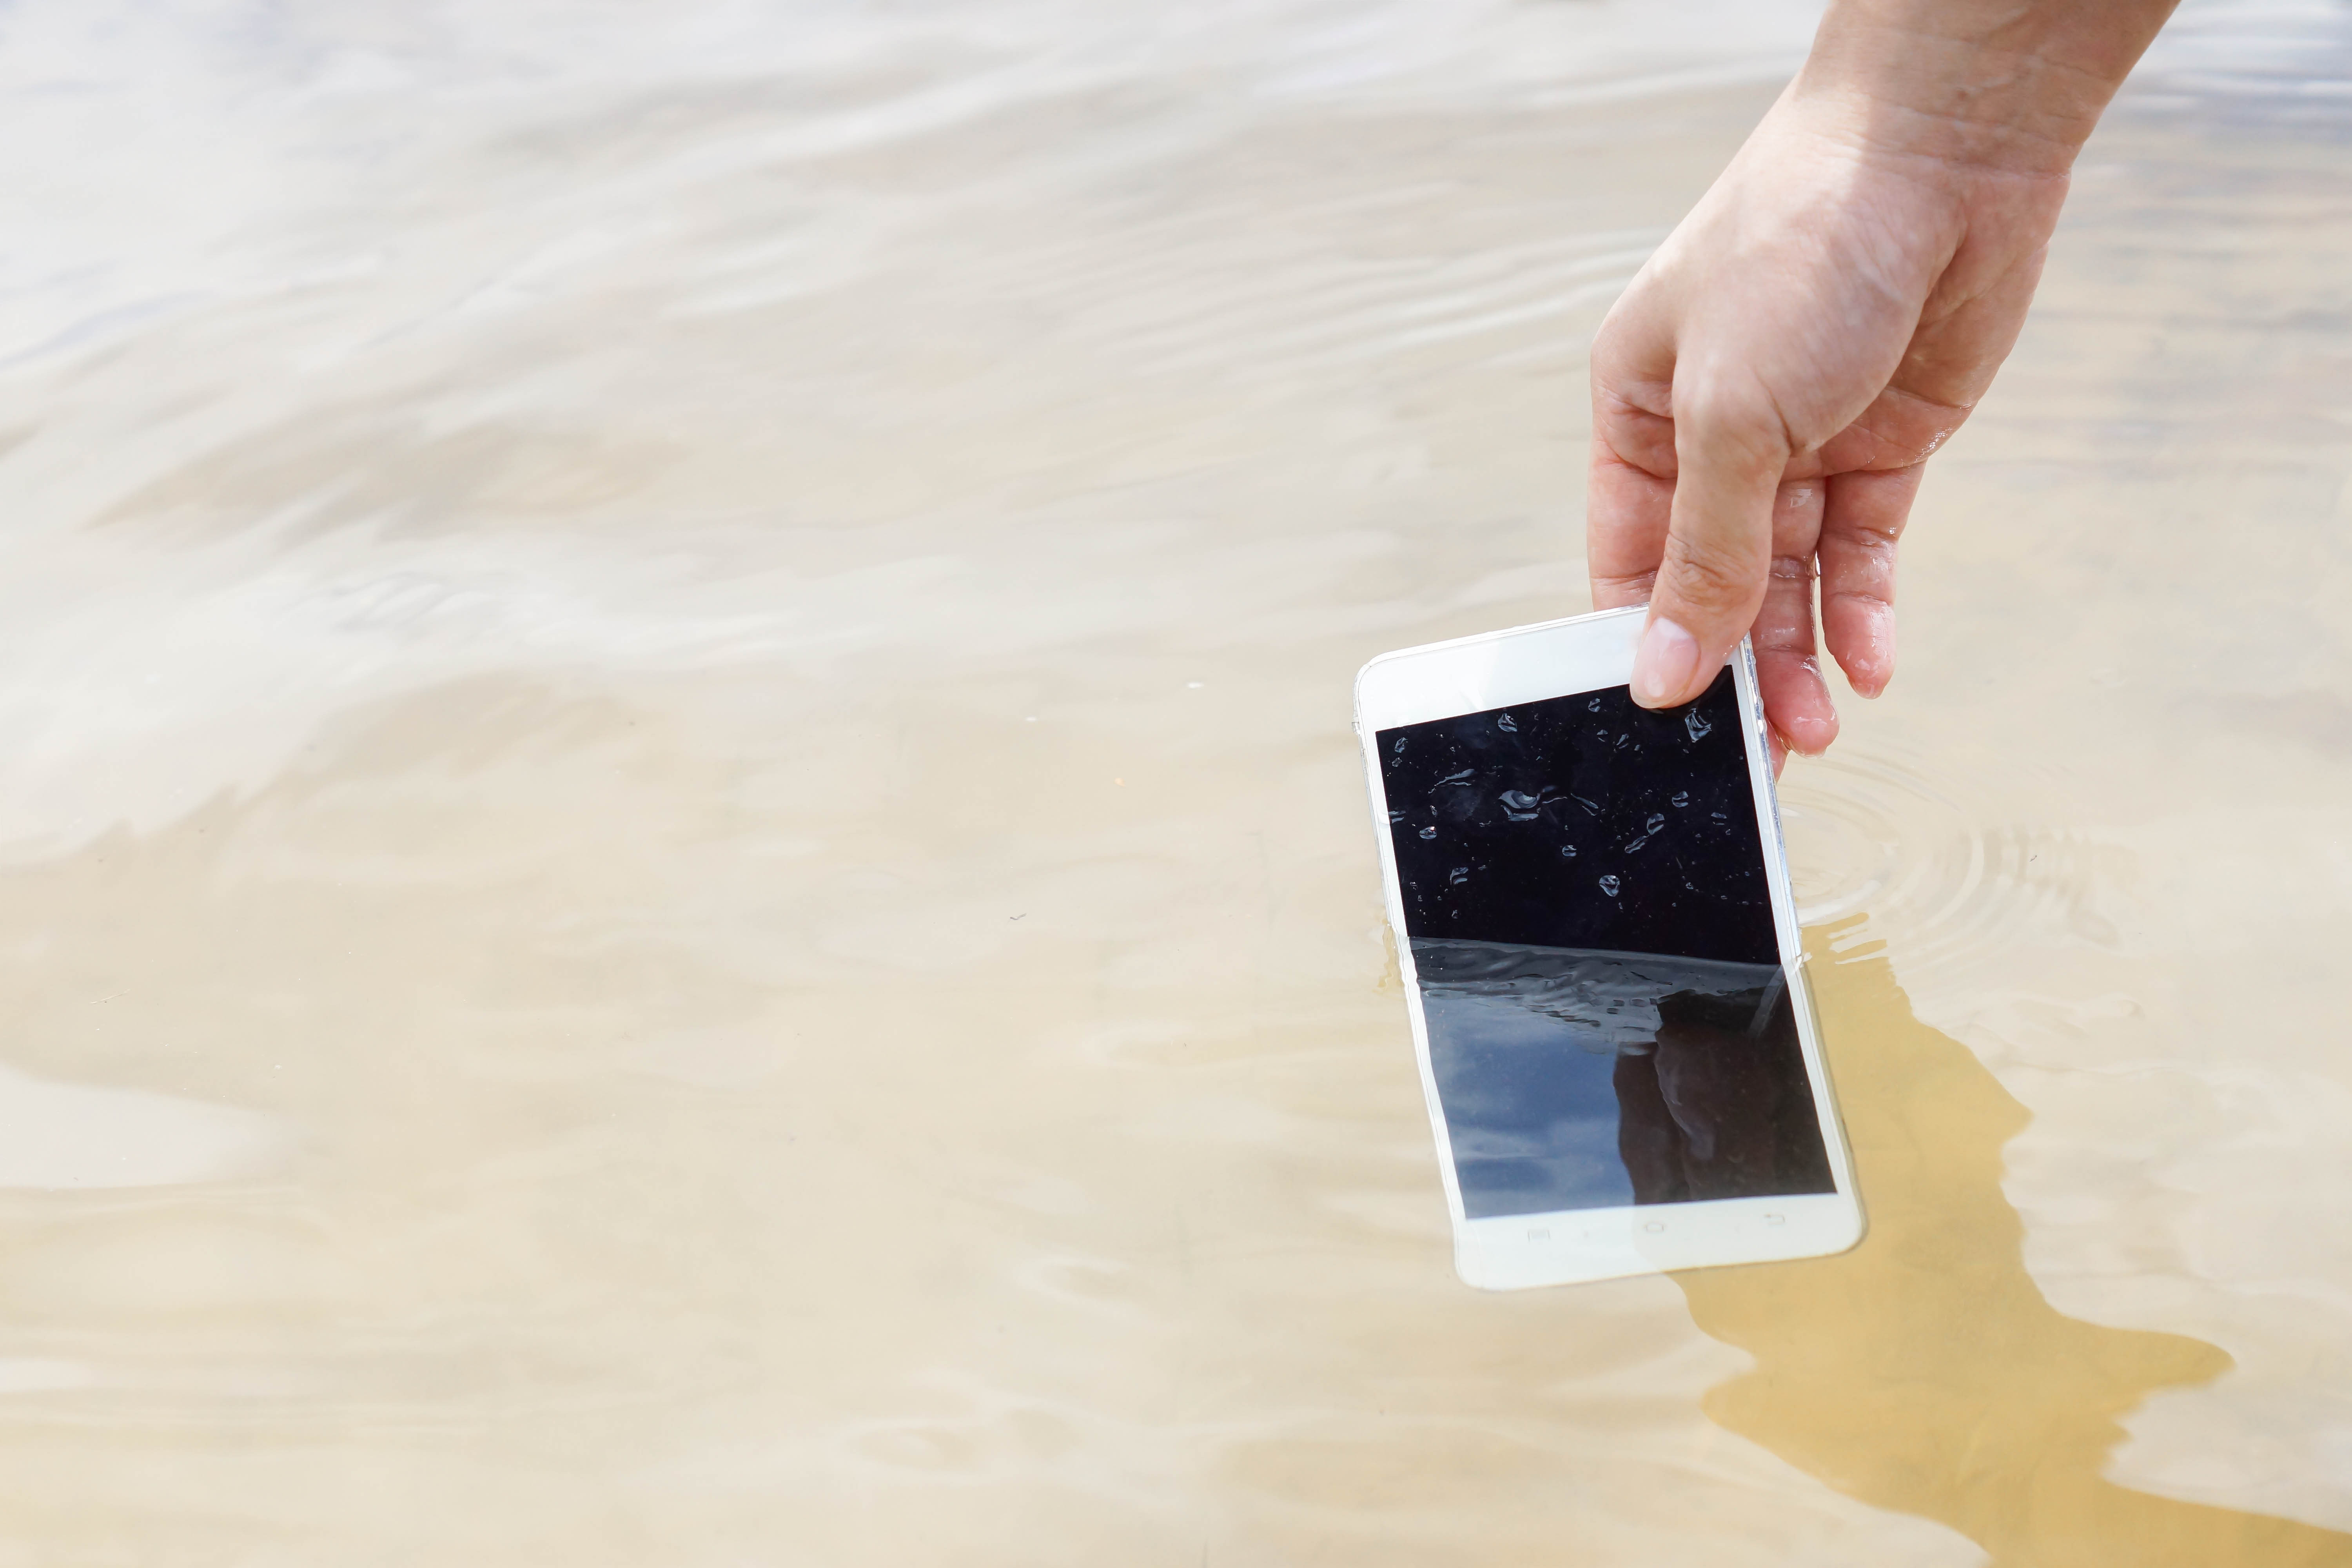 How to fix your water-damaged phone